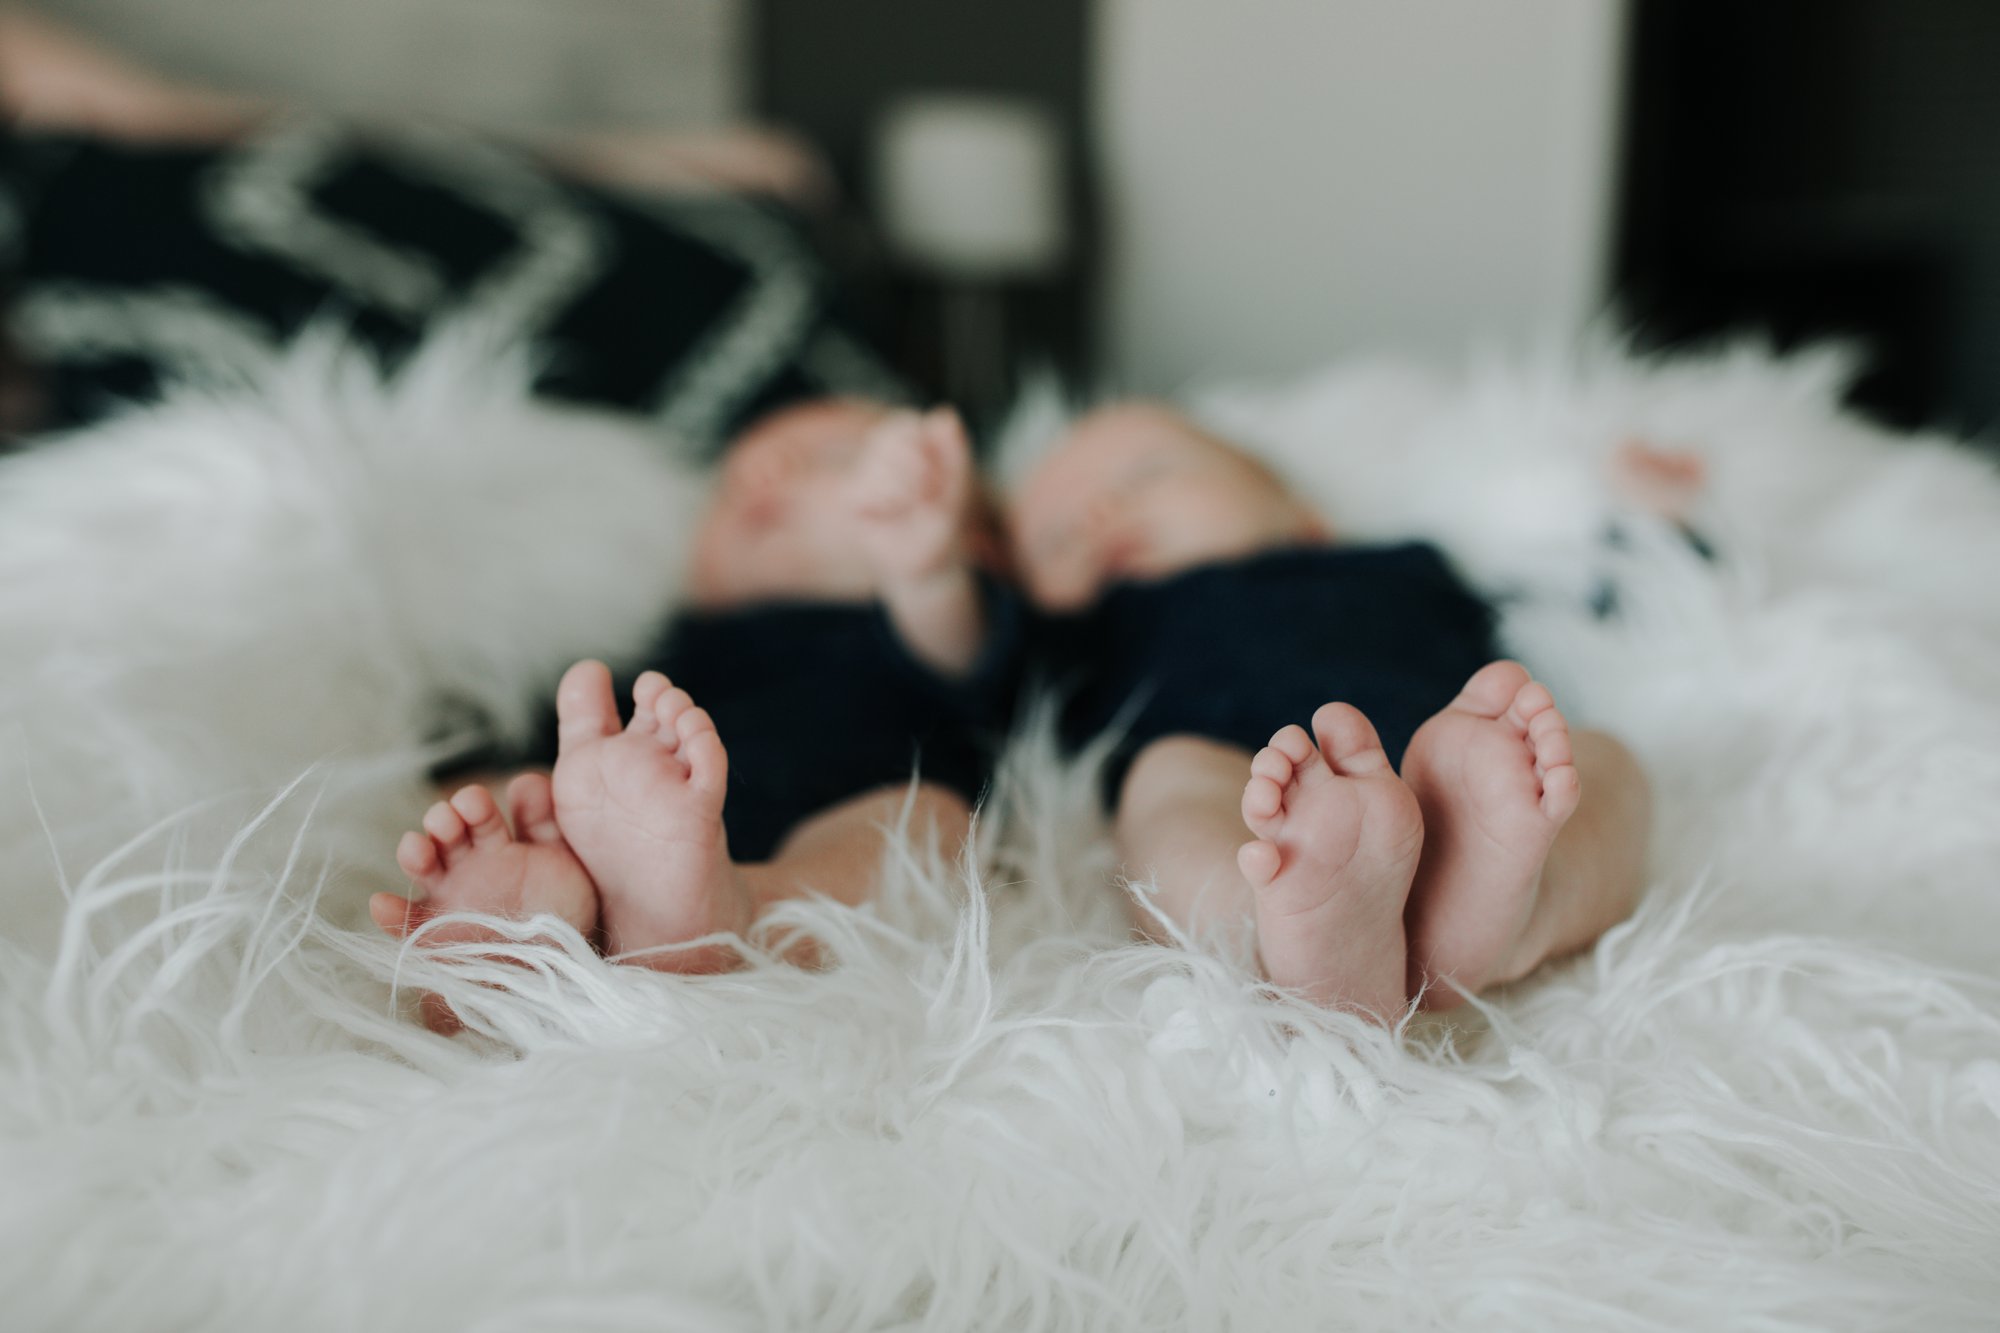 Lifestyle - newborn twins and their toes.